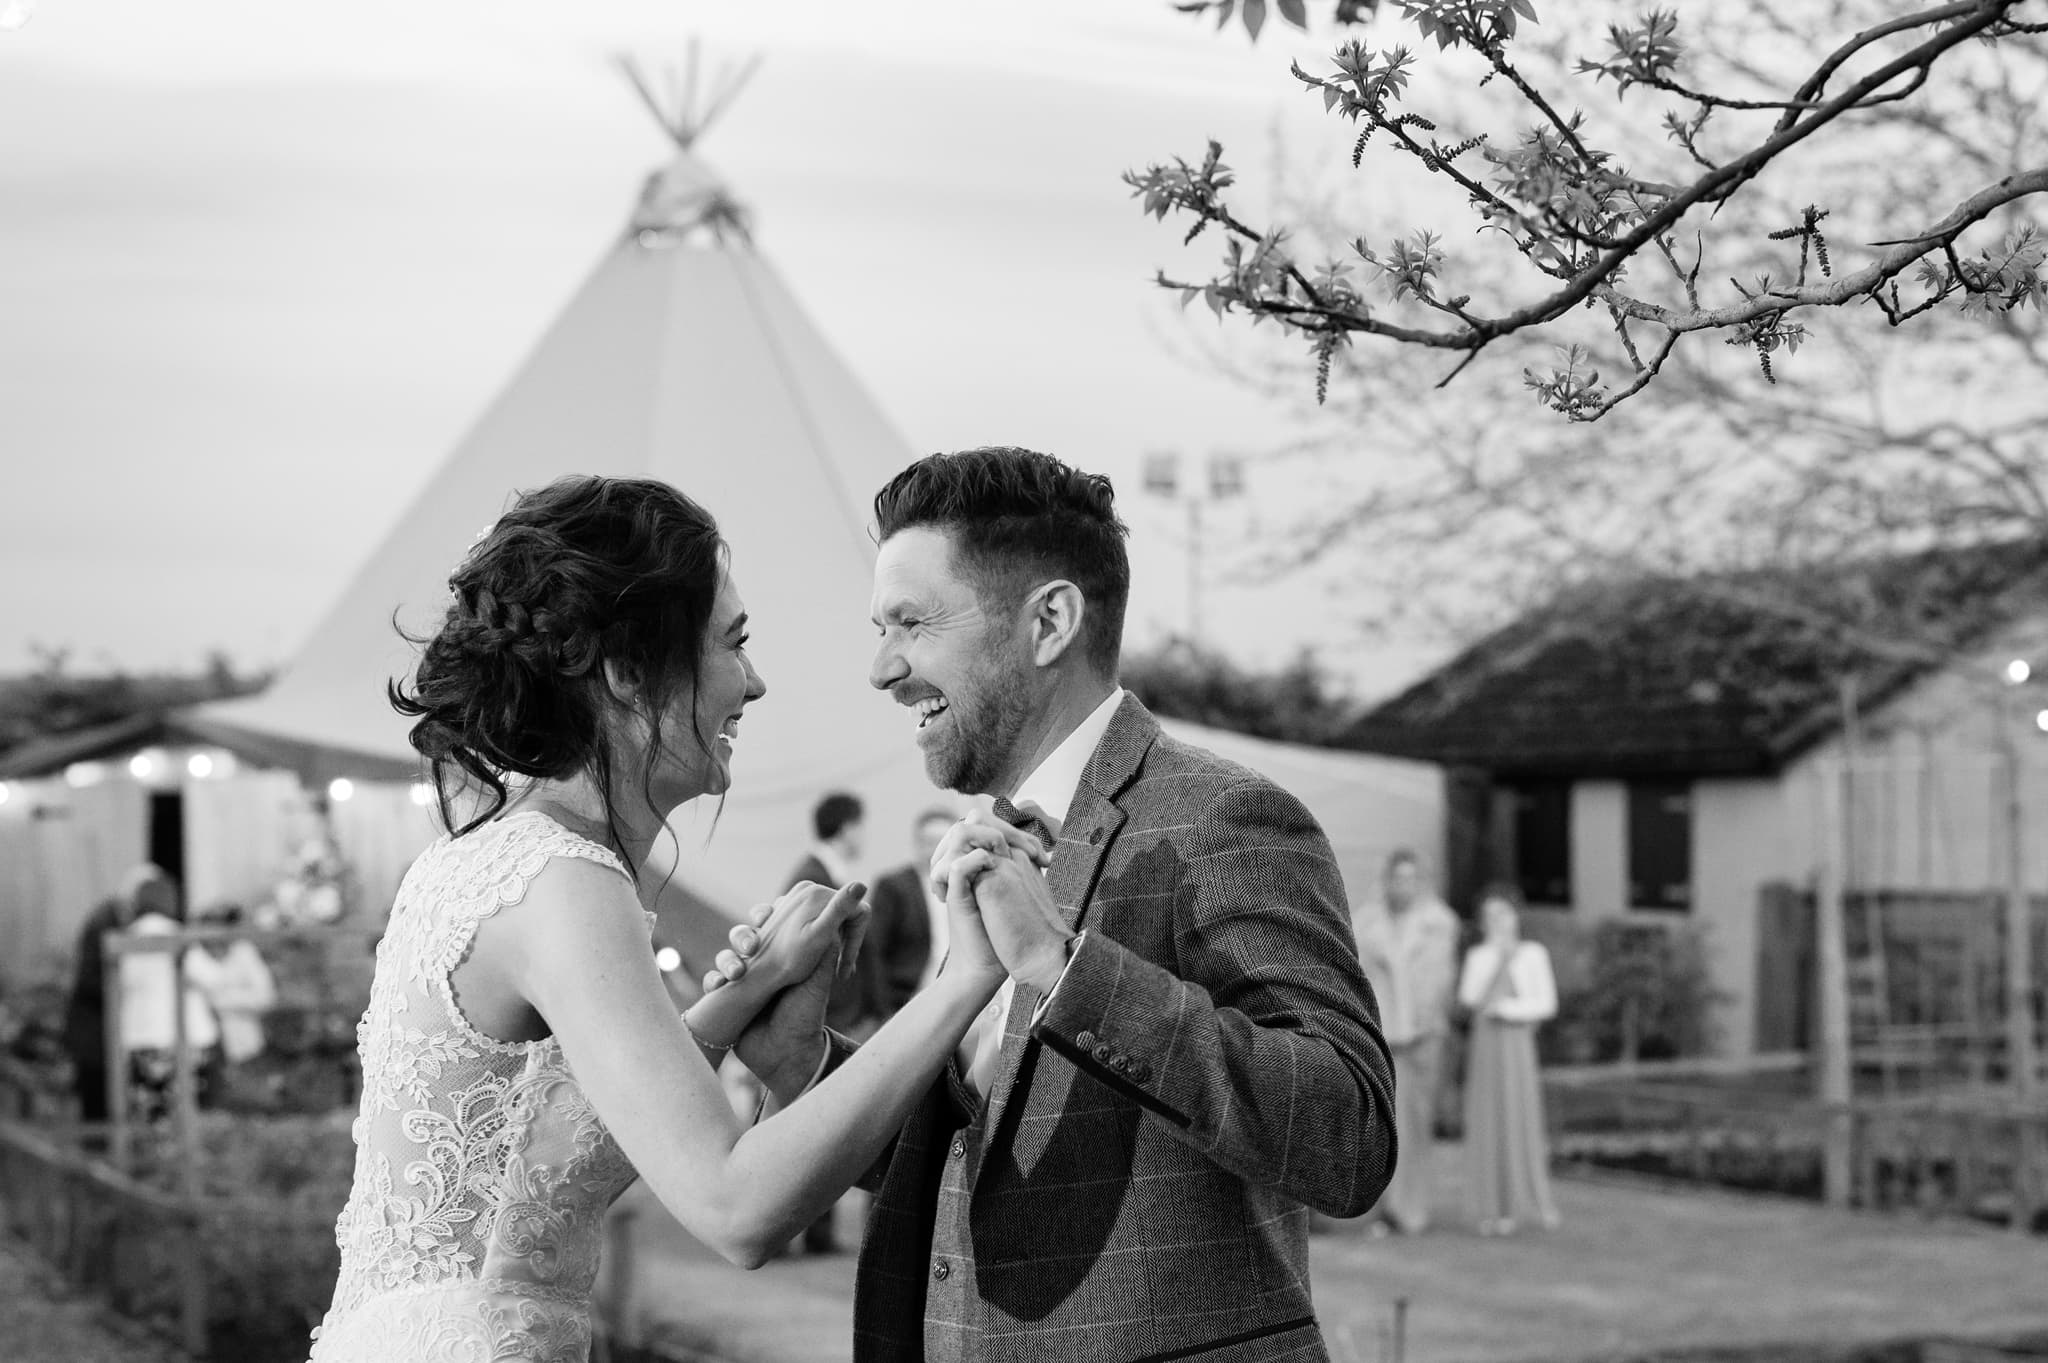 Outside first dance in front of a wedding tipi